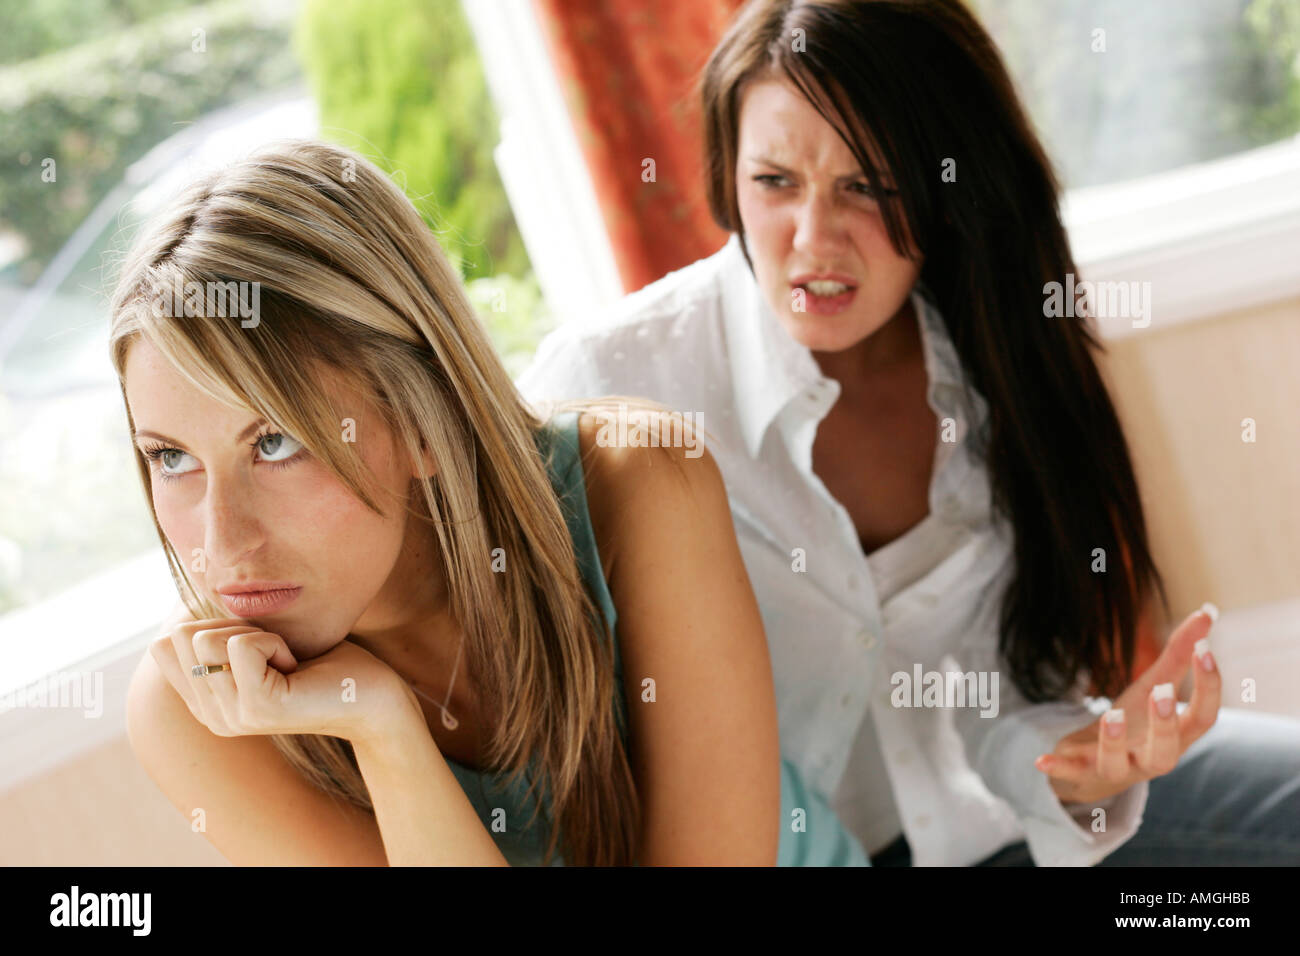 two girls arguing Stock Photo